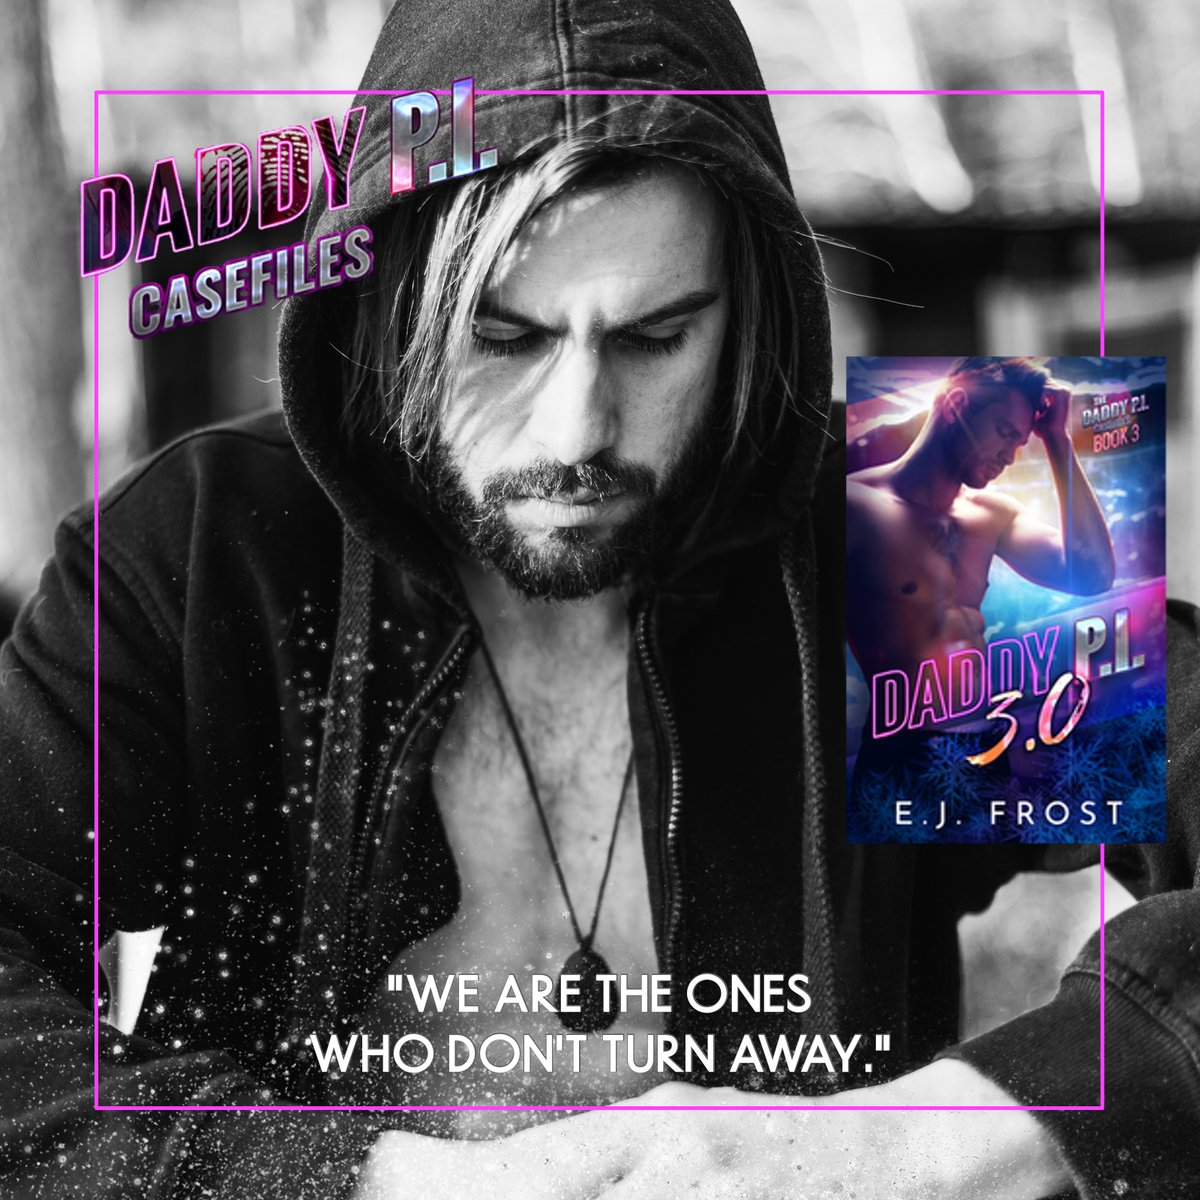 I let her words sink into me. Roll around in my heart. I always take my baby doll’s feelings into account.
But I don’t always let them rule my decisions. 
-Daddy P.I. 3.0
#amwritingromance
books2read.com/daddypi3
#RomanceReaders